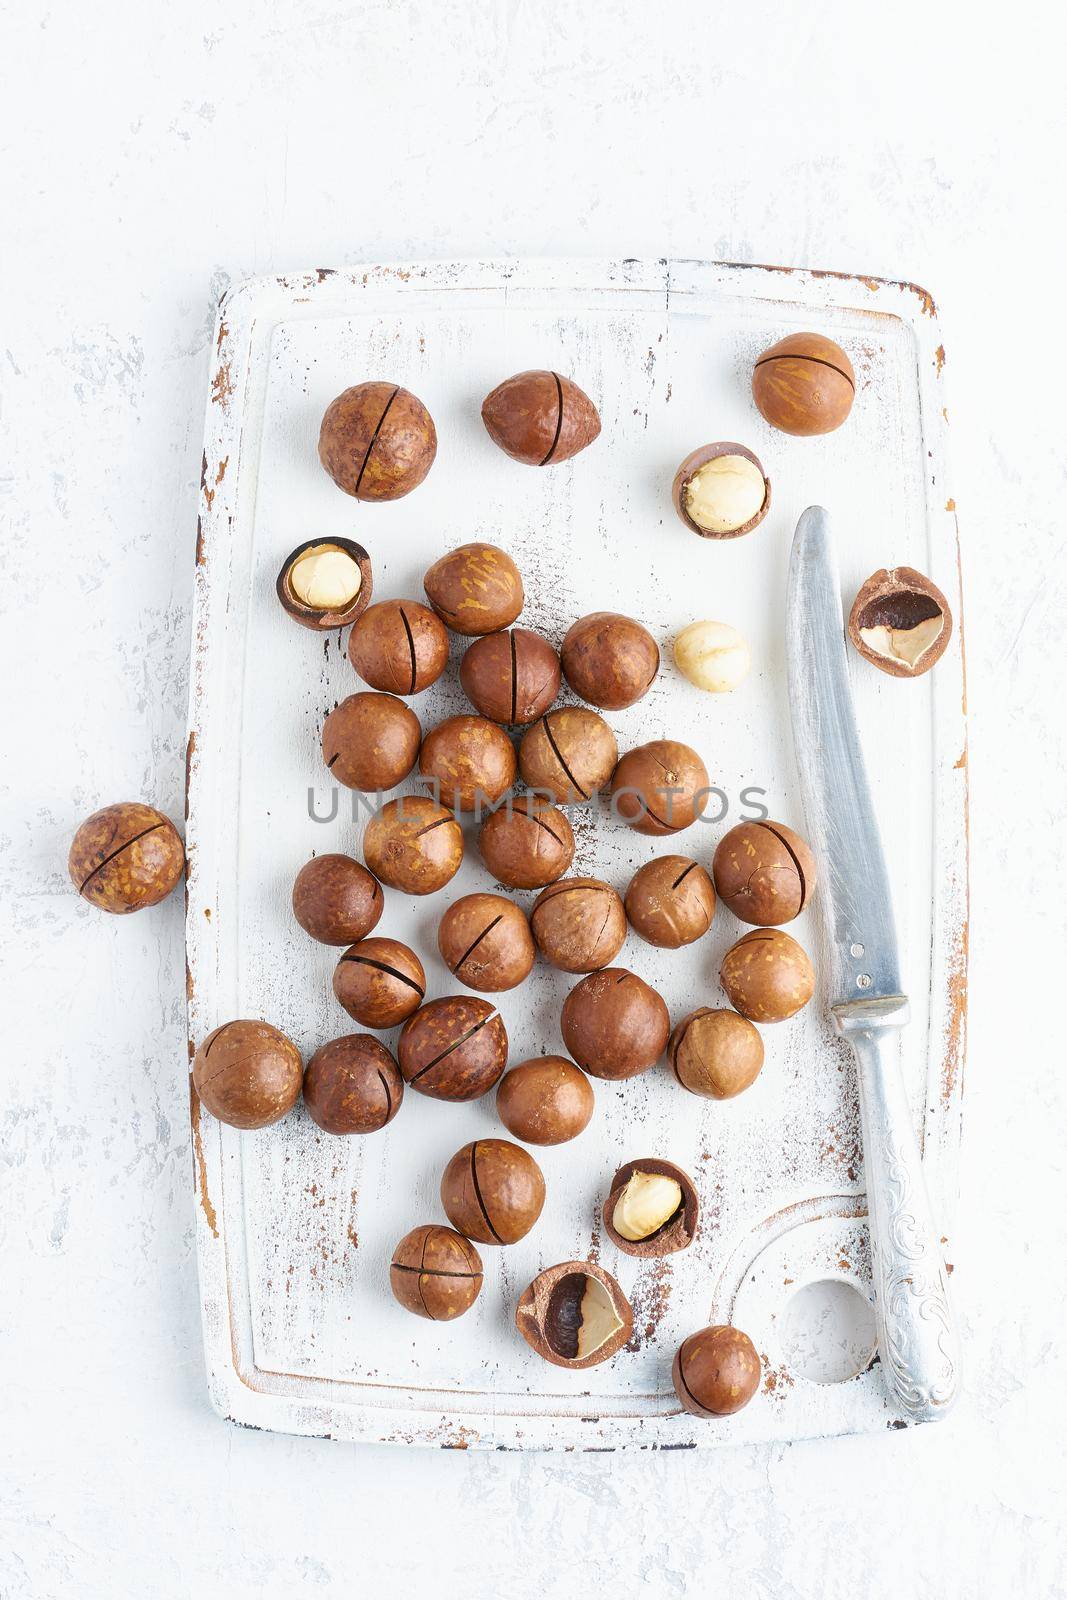 Plate with almonds in endocarp, whole and chopped open nuts in bulk on a cutting board with knife on a white background, top view.